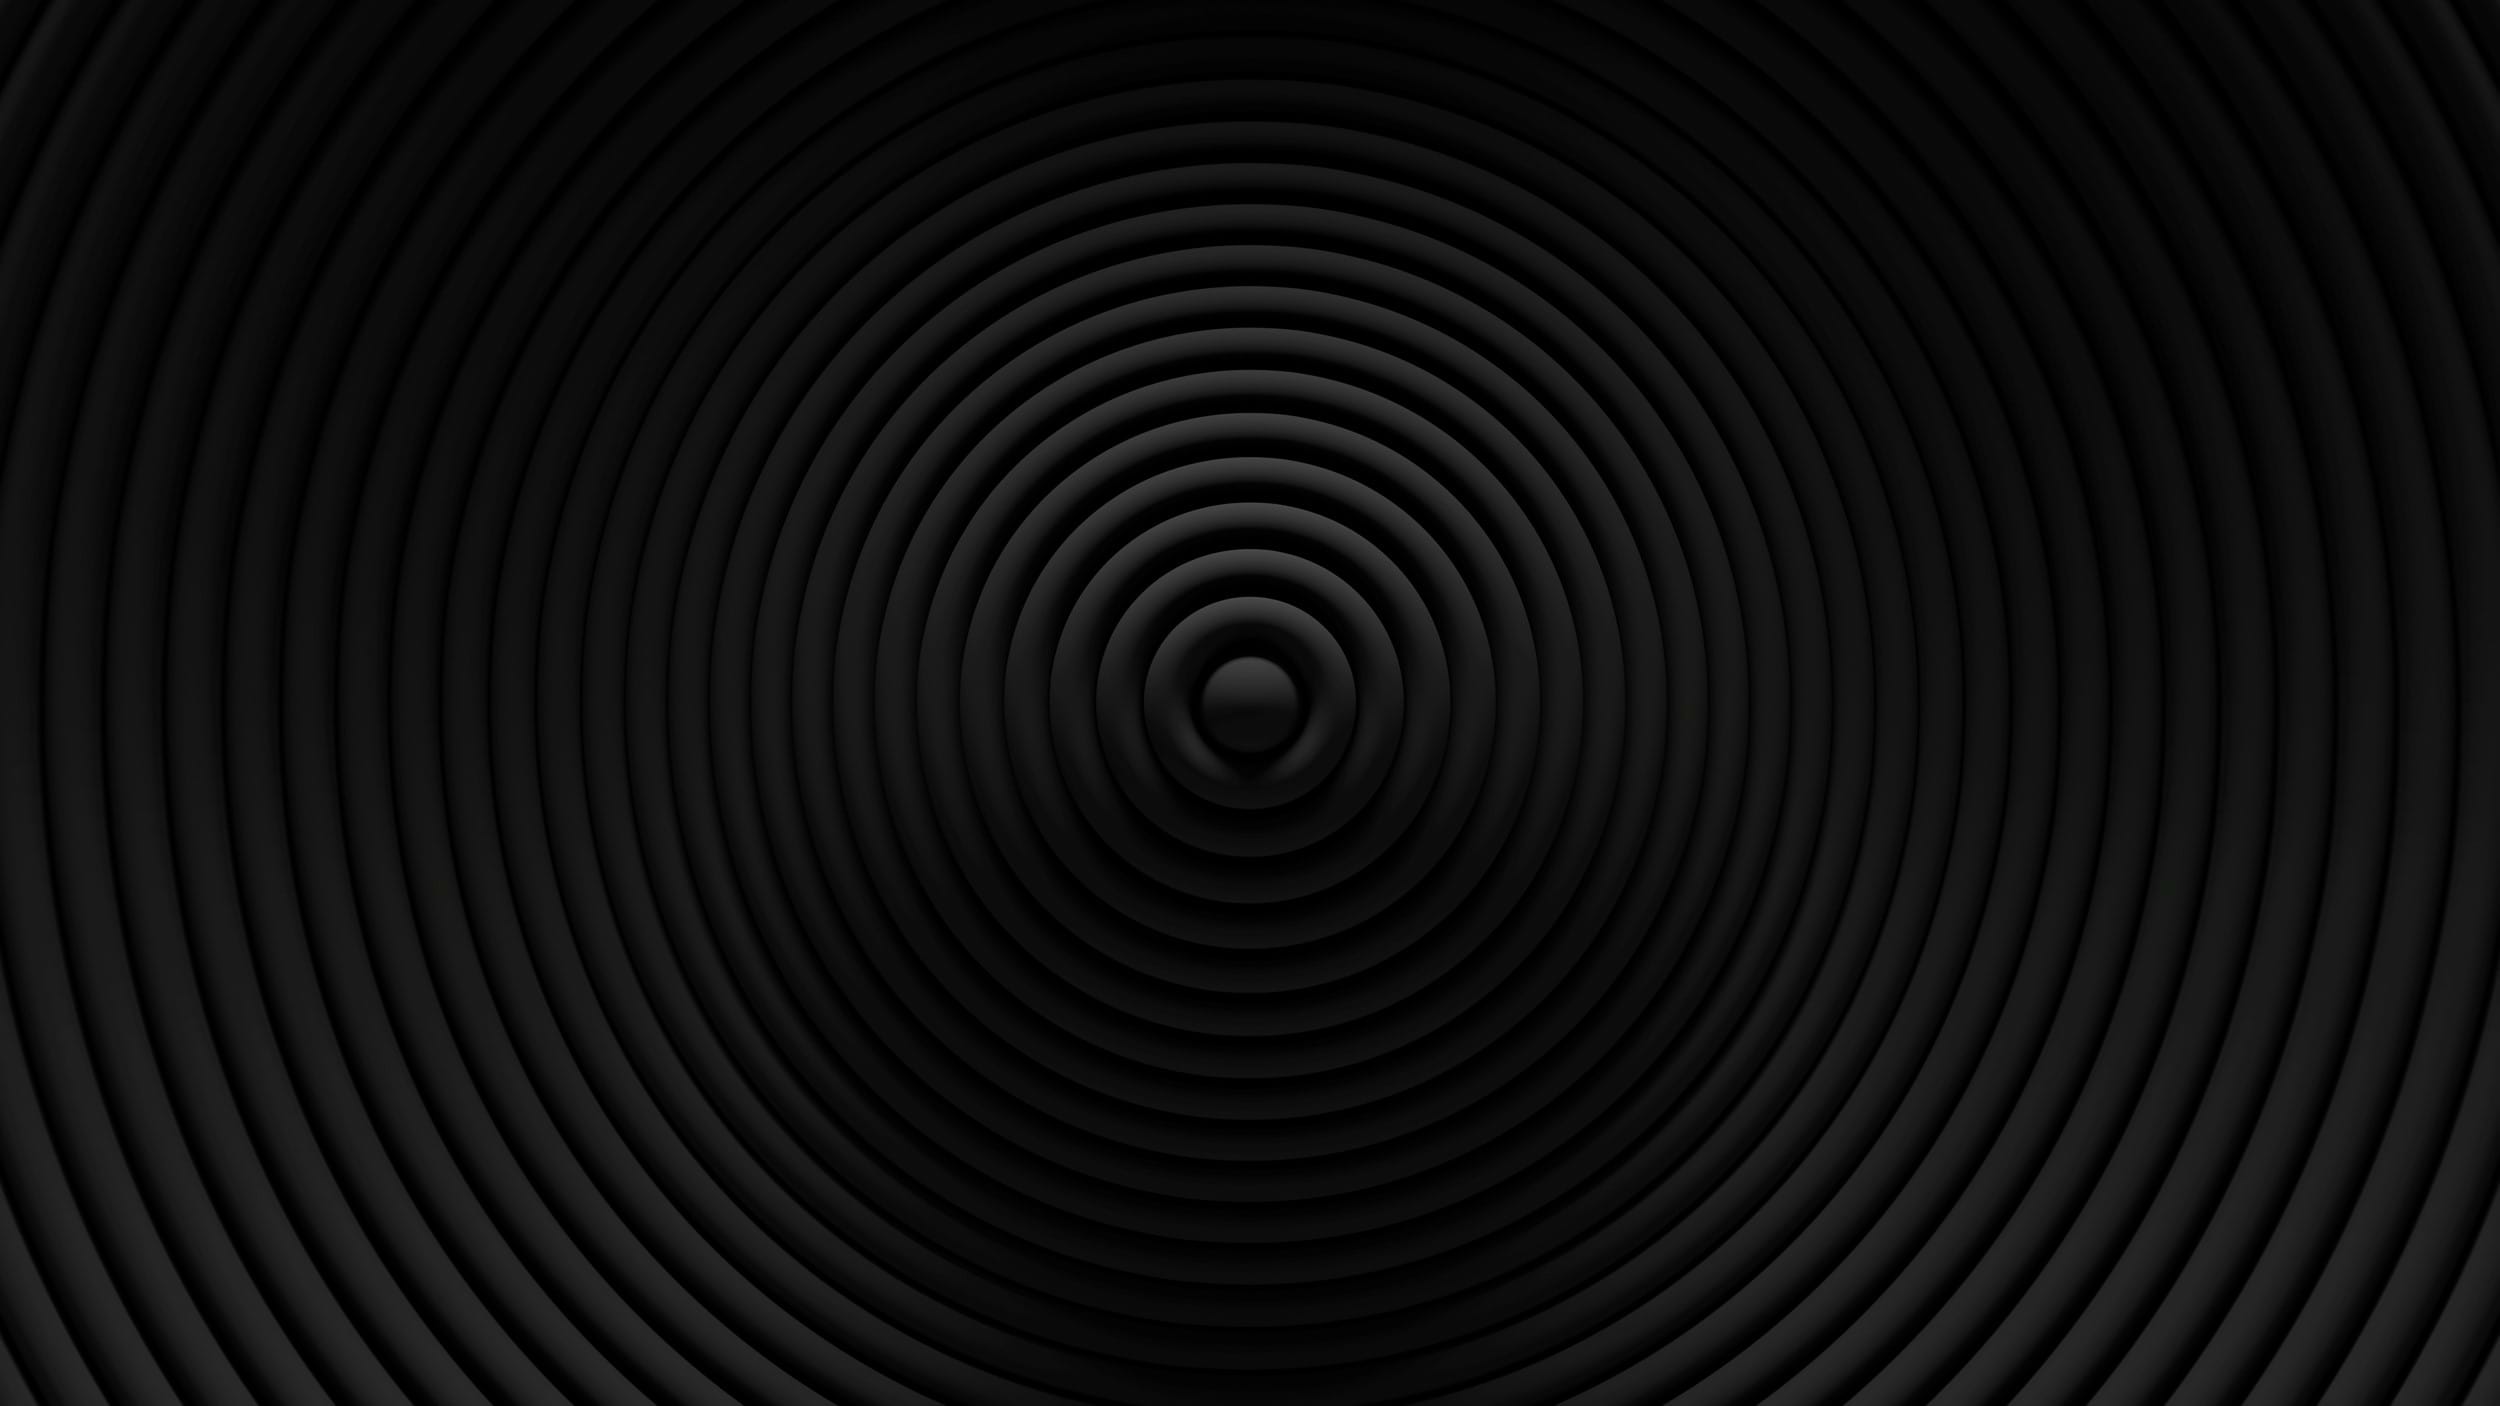 Abstract Circular Blinds Oscillation Background 3D Rings Wavy Surface Geometric Elements Displacement